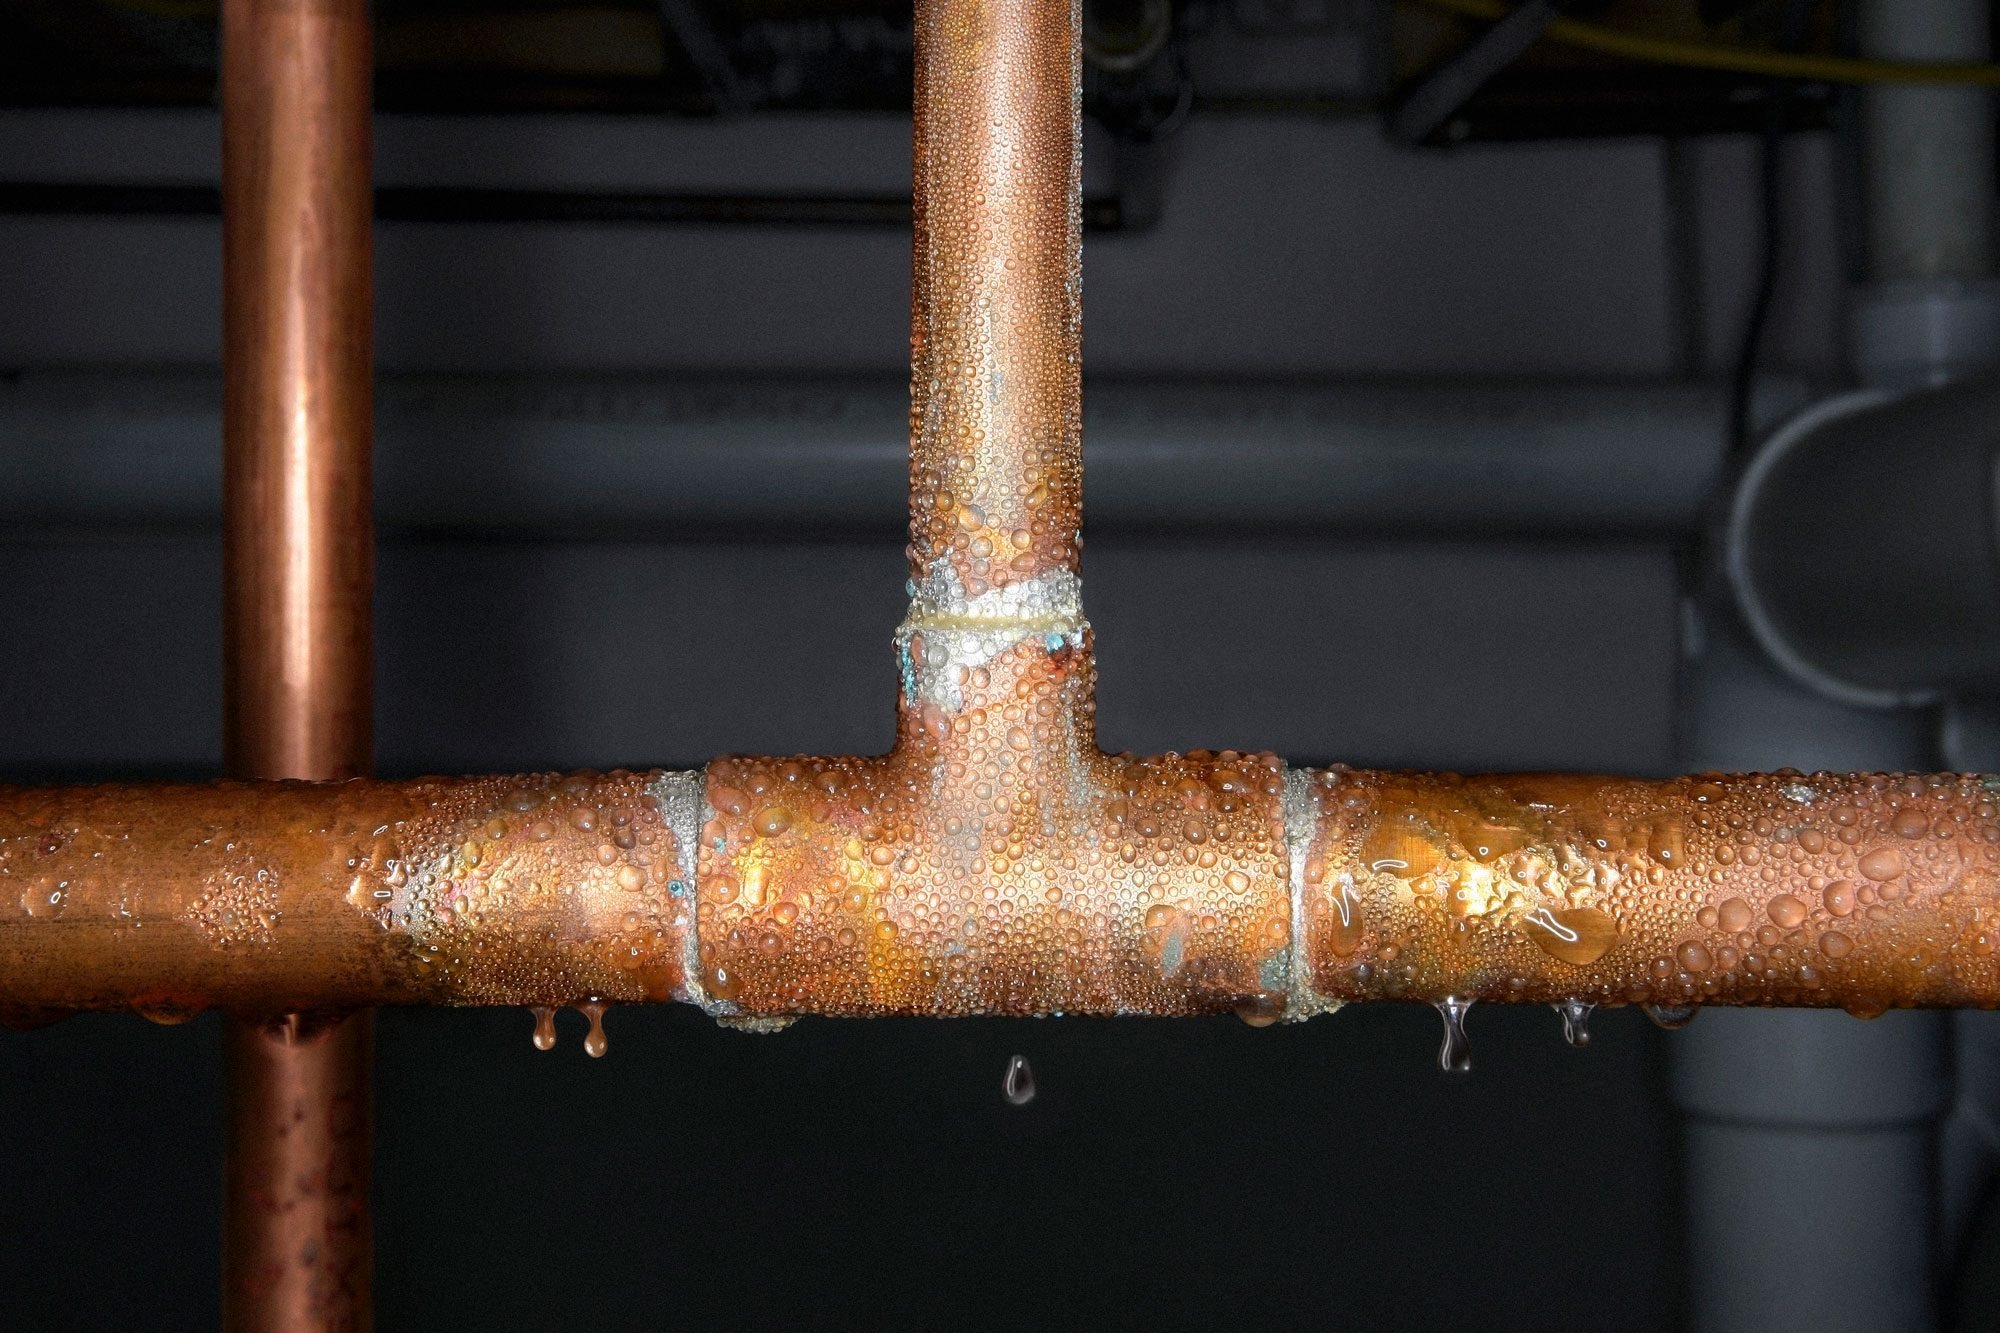 How Do You Stop Condensation on Water Pipes?